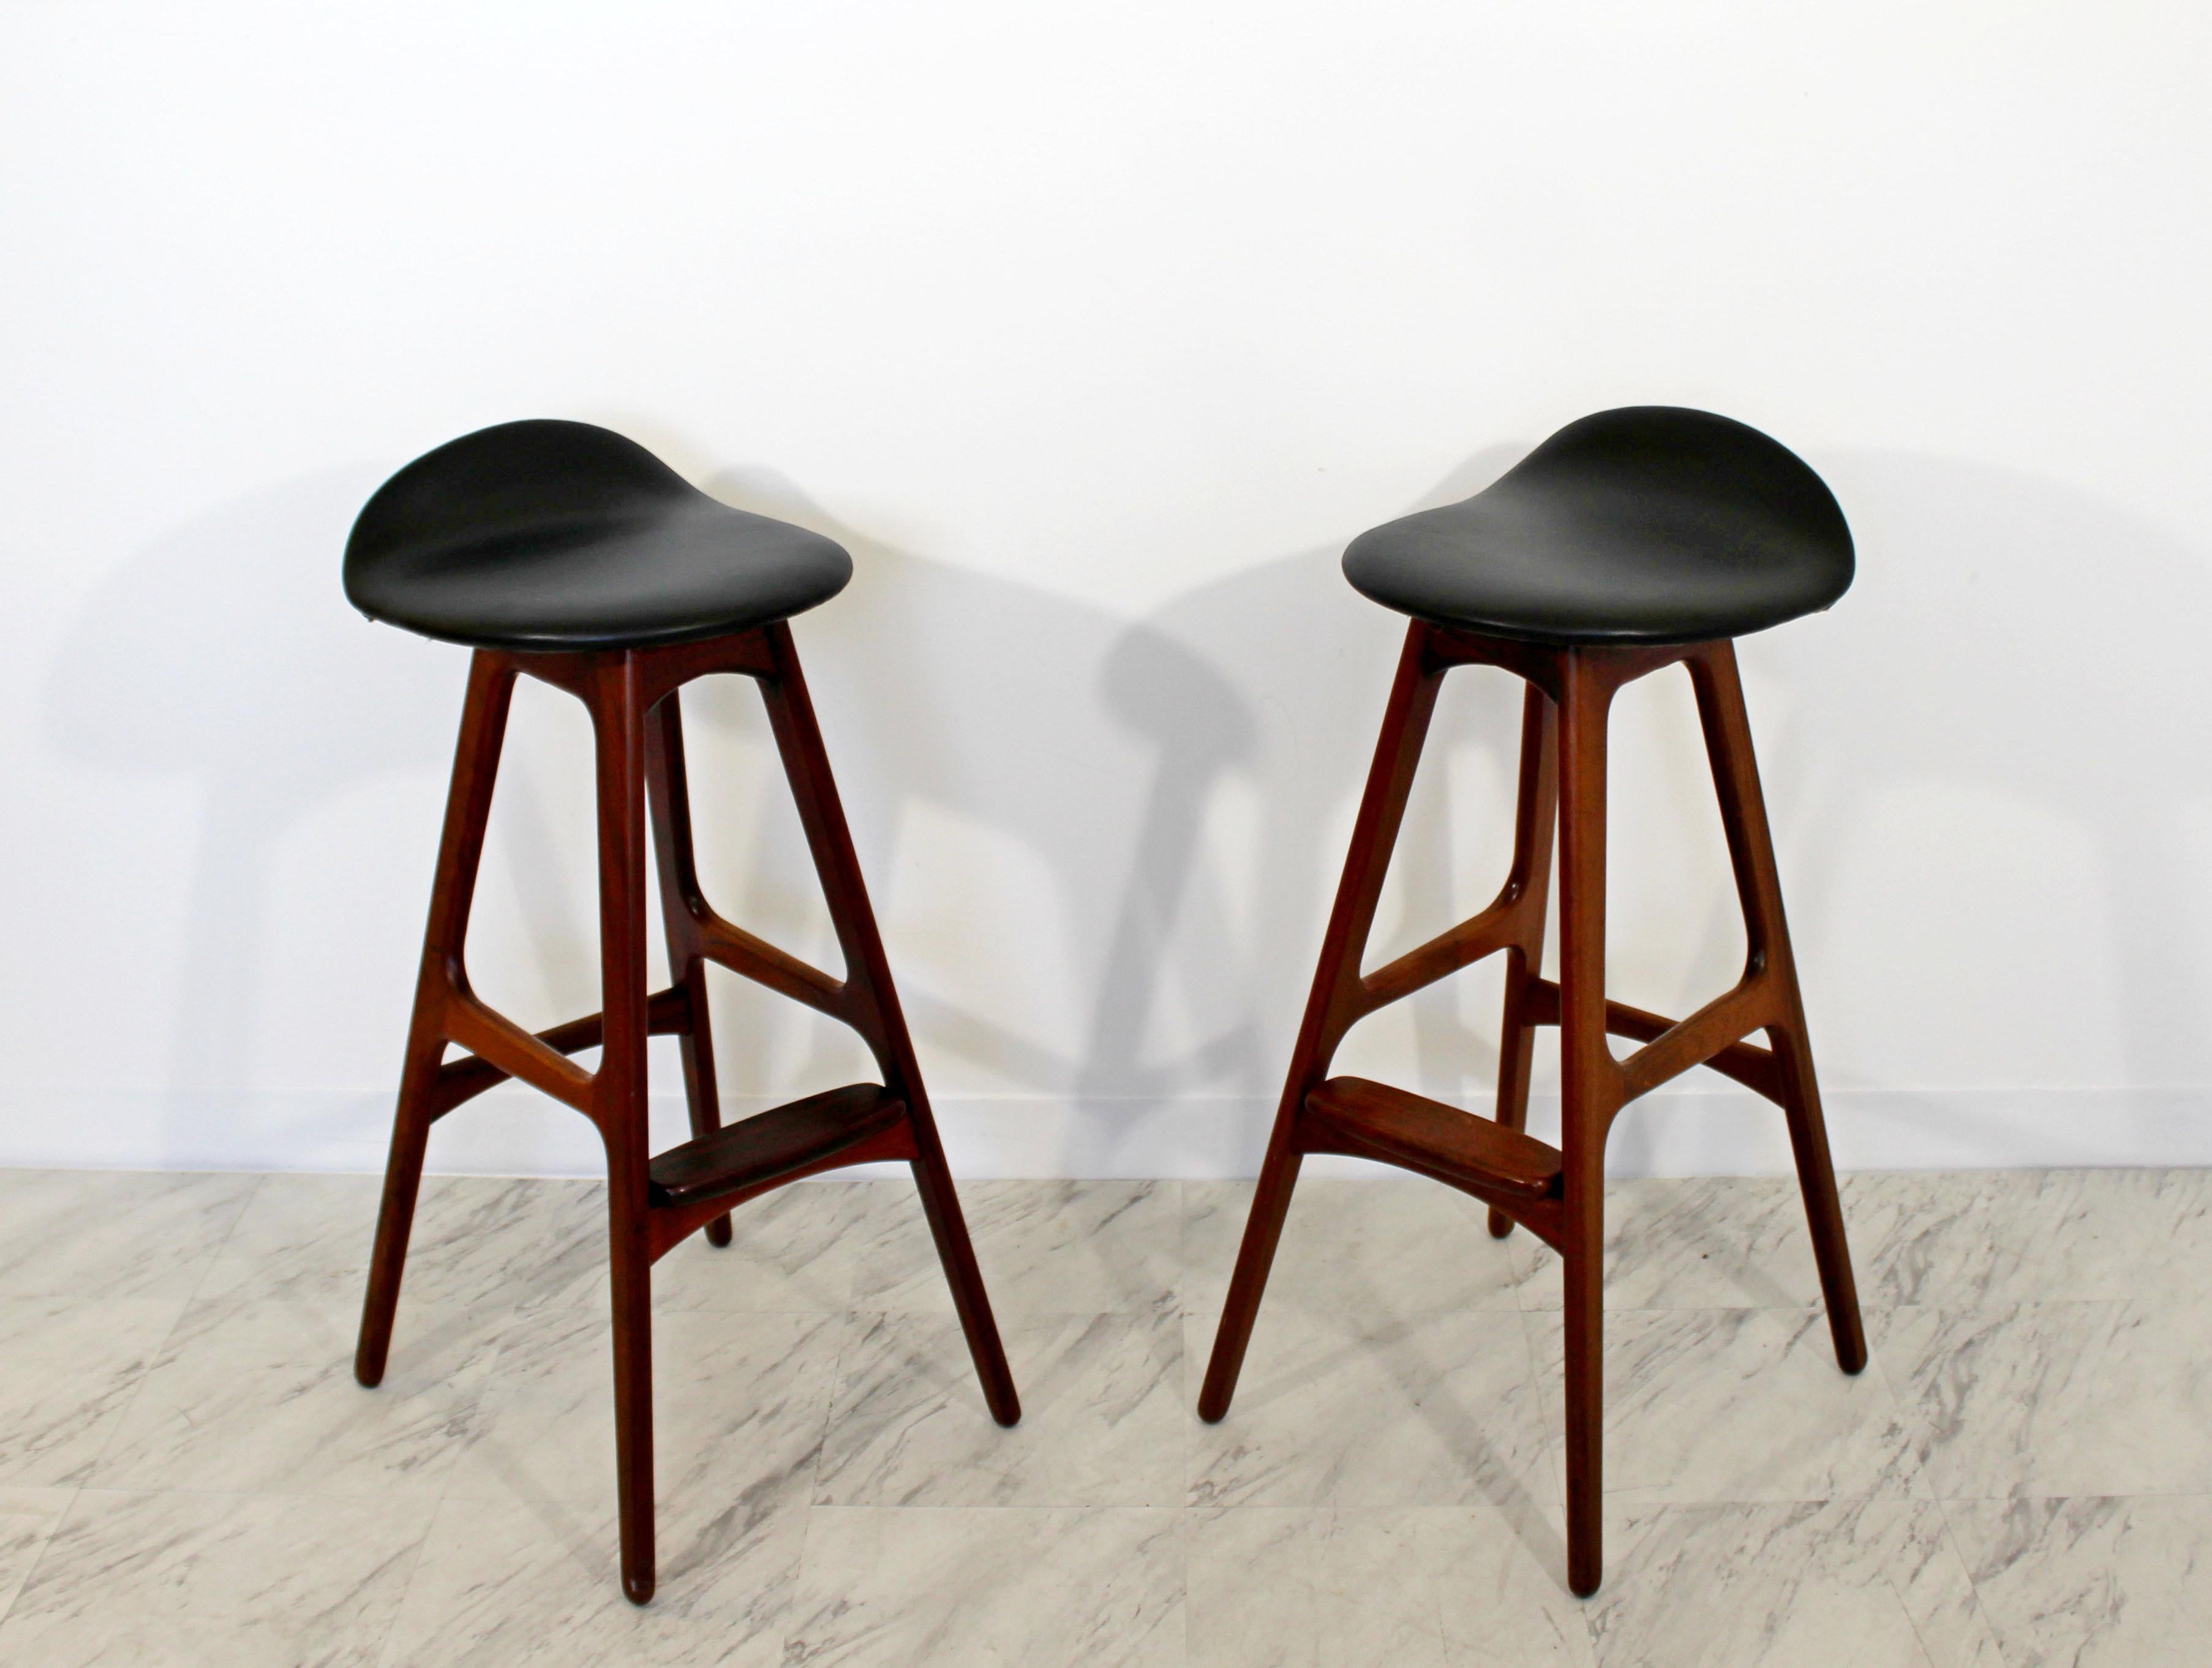 For your consideration is a sleek pair of teak and rosewood and black leather bar stools, by Erik Buch, made in Denmark, circa the 1960s. In excellent condition. The dimensions are 14